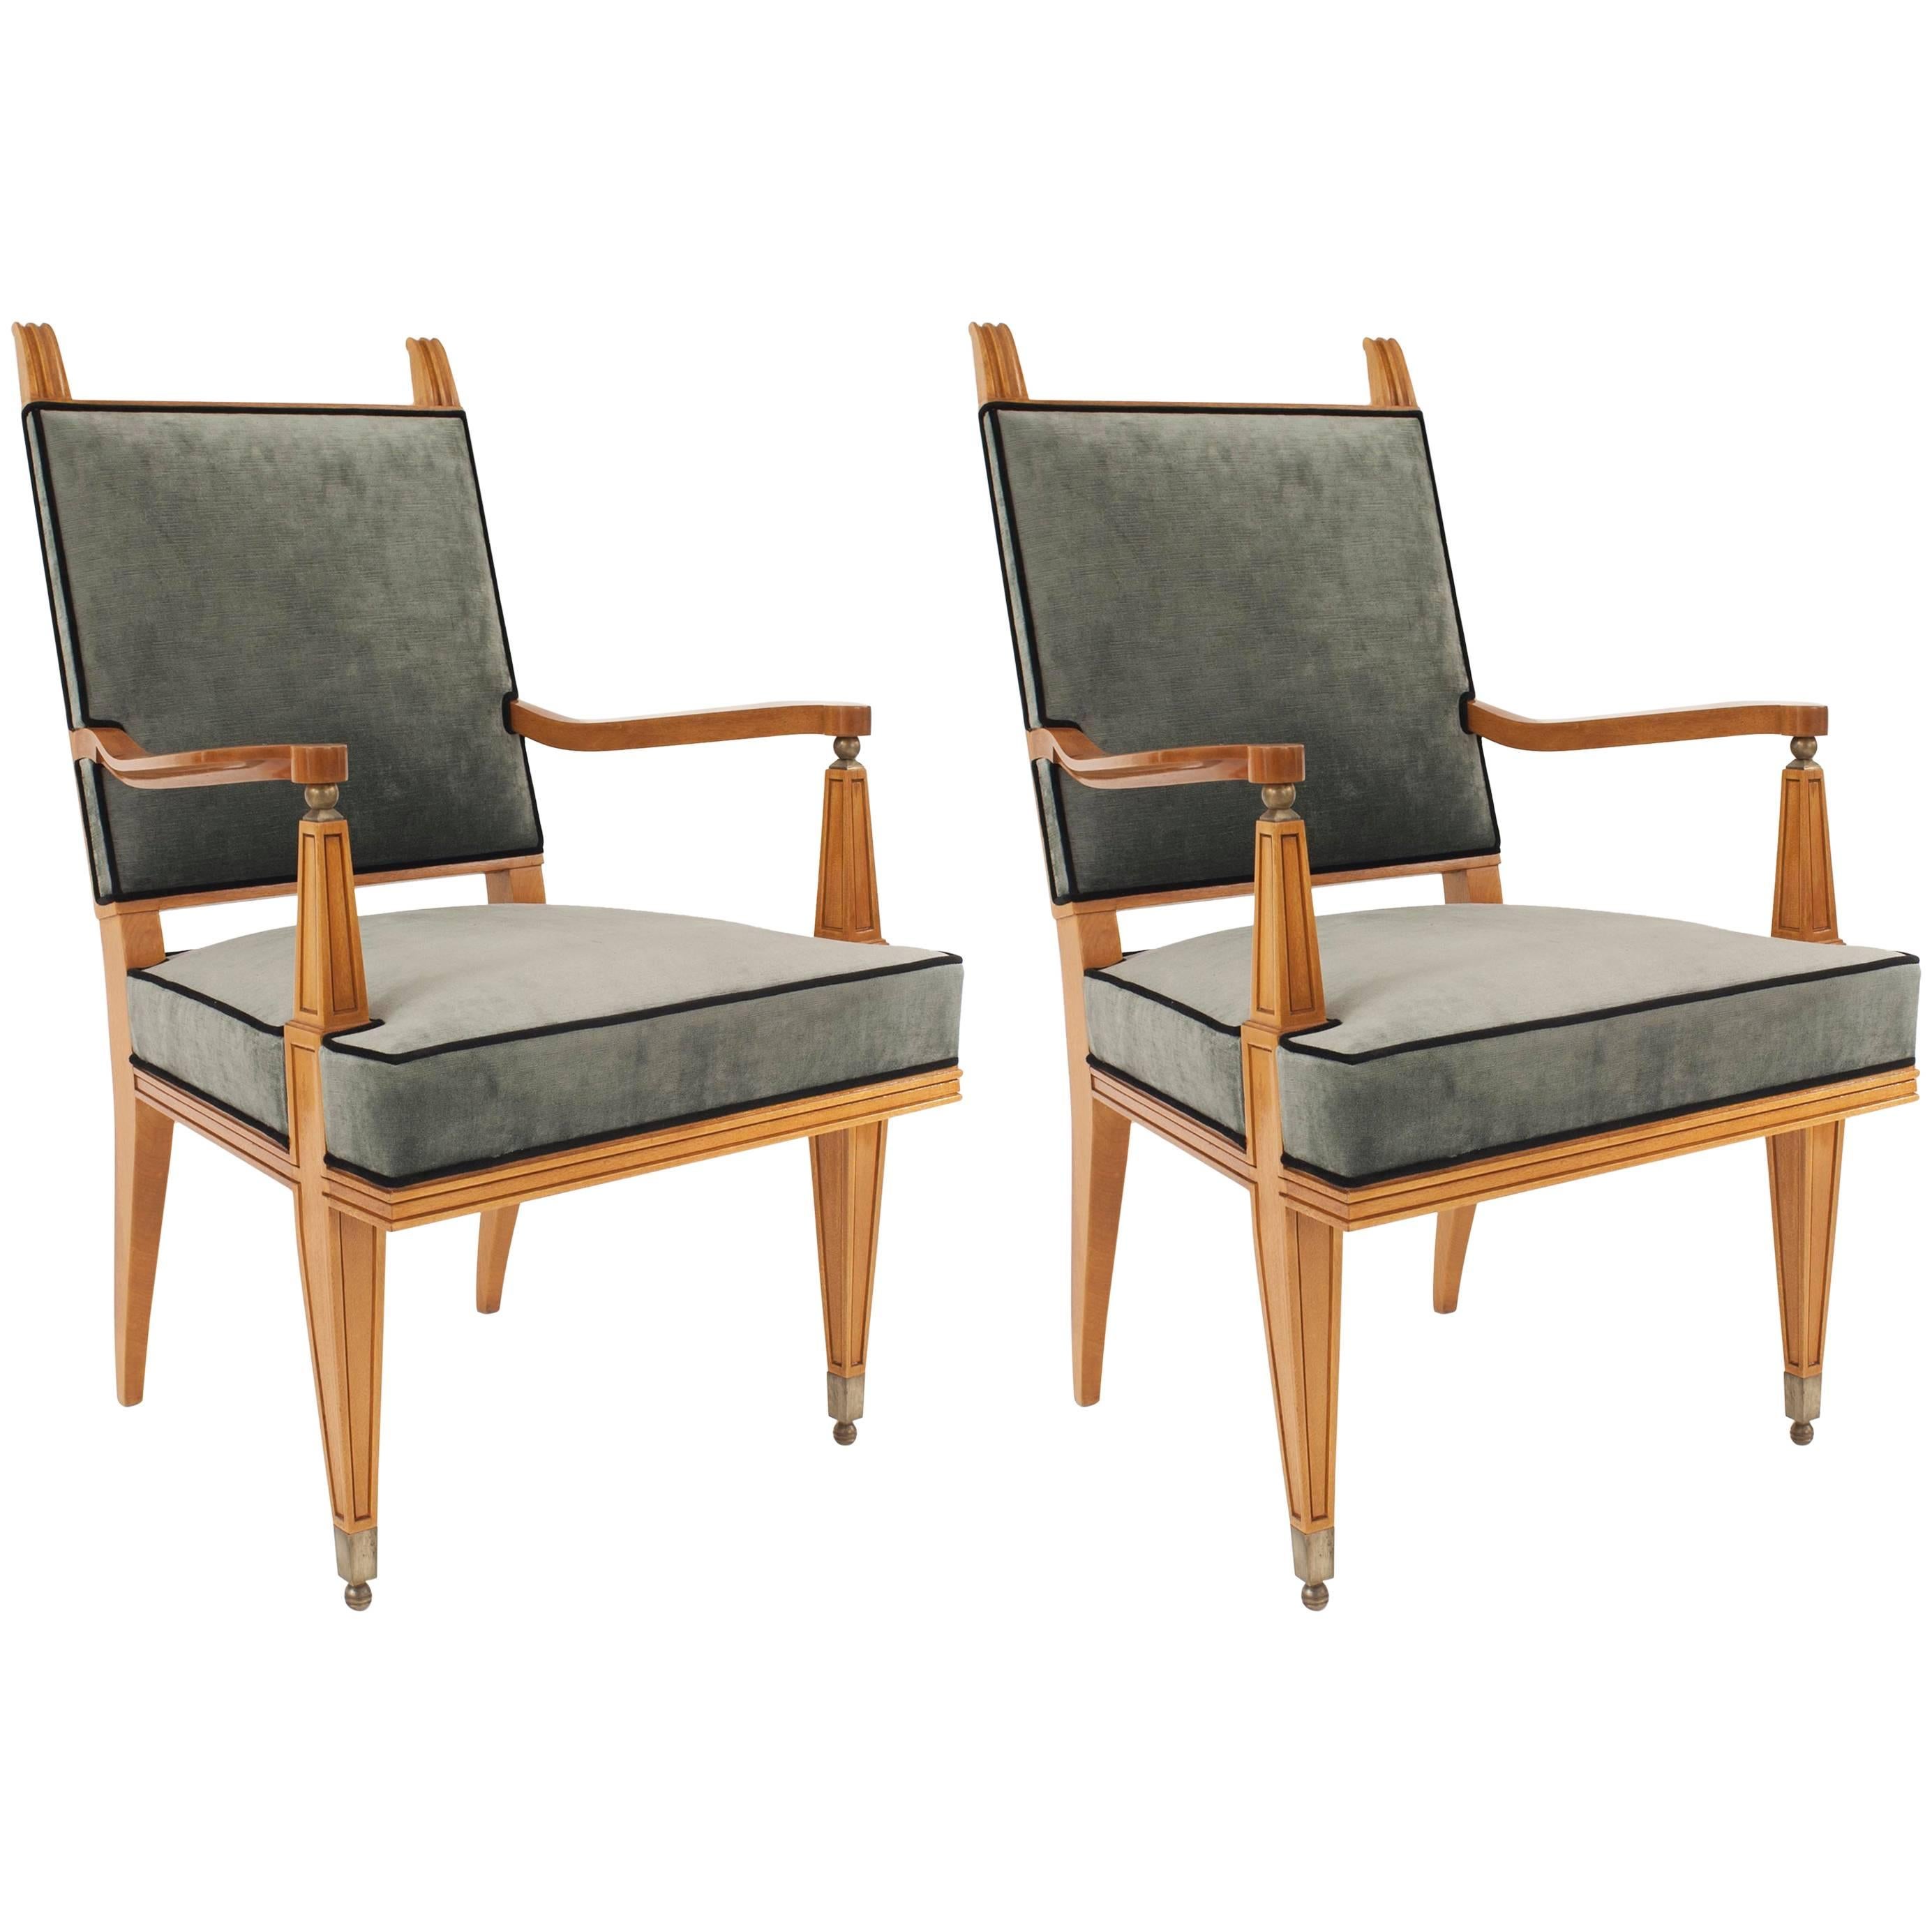 Pair French Mid-century Arm Chairs, Attrib. to Lucien Rollin